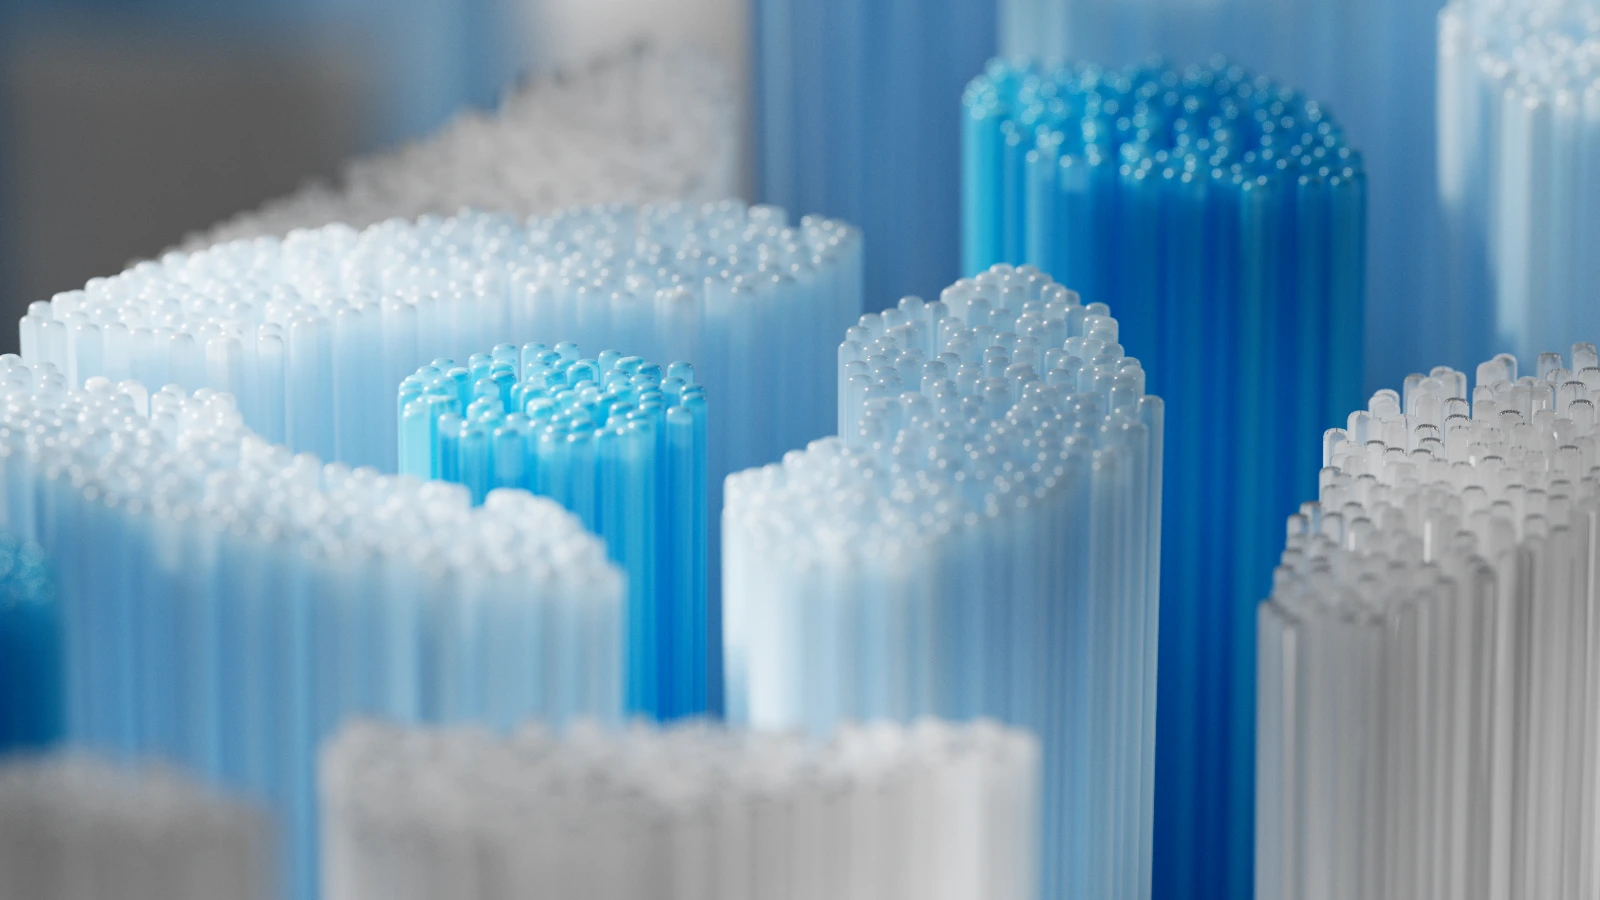 Bristles - Are the bristles soft enough to care for your gums while still producing satisfactory brushing results?